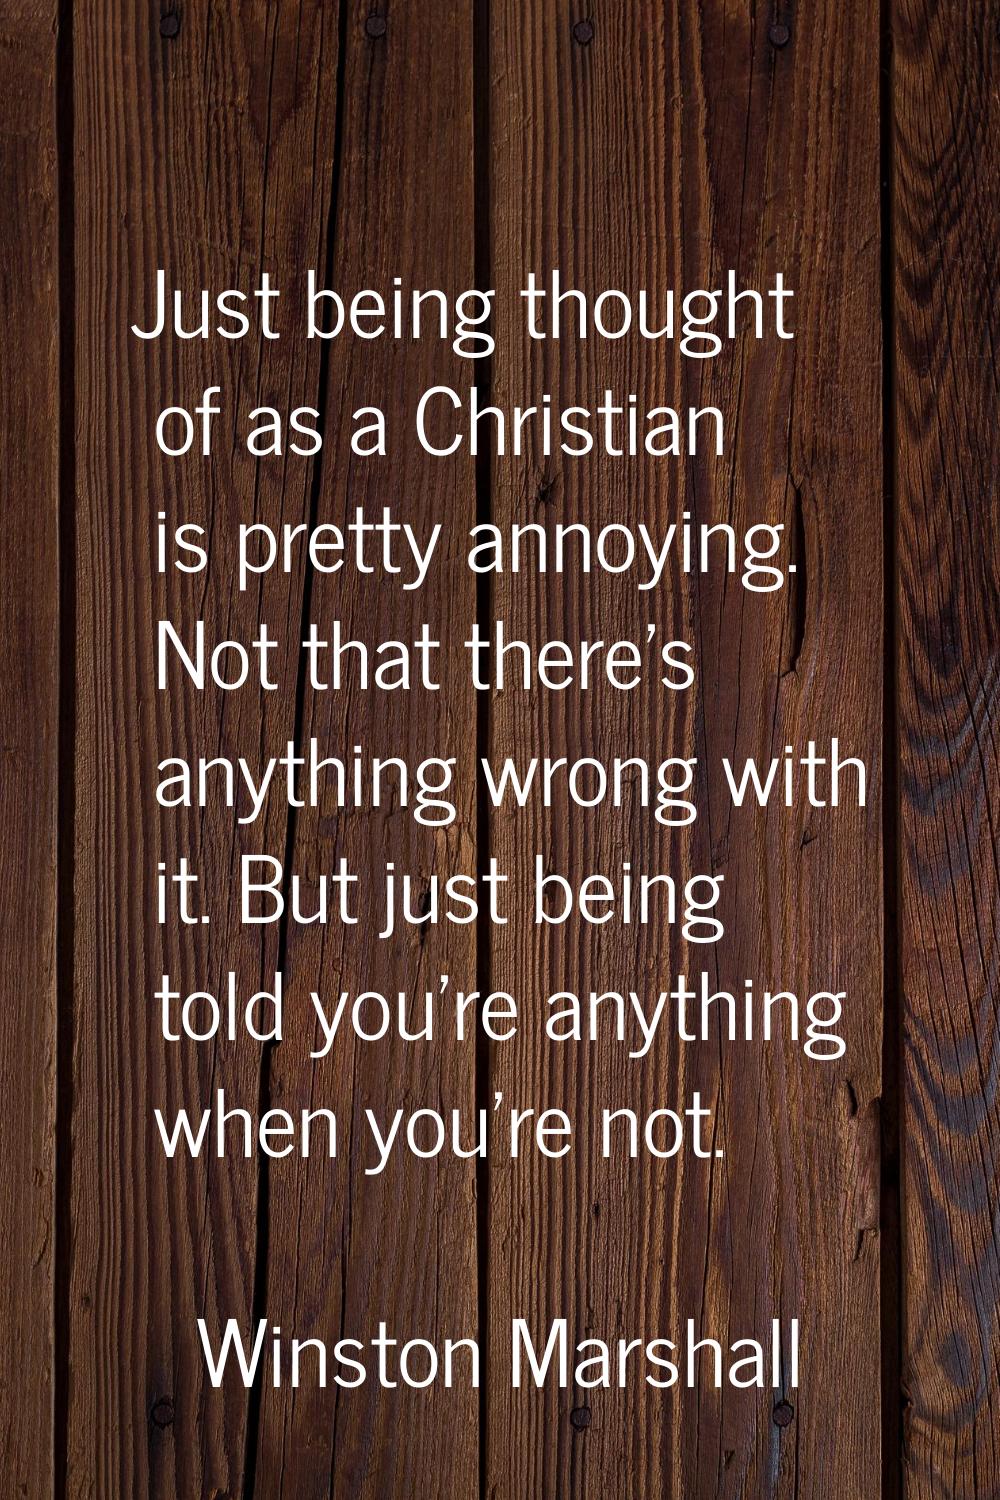 Just being thought of as a Christian is pretty annoying. Not that there's anything wrong with it. B